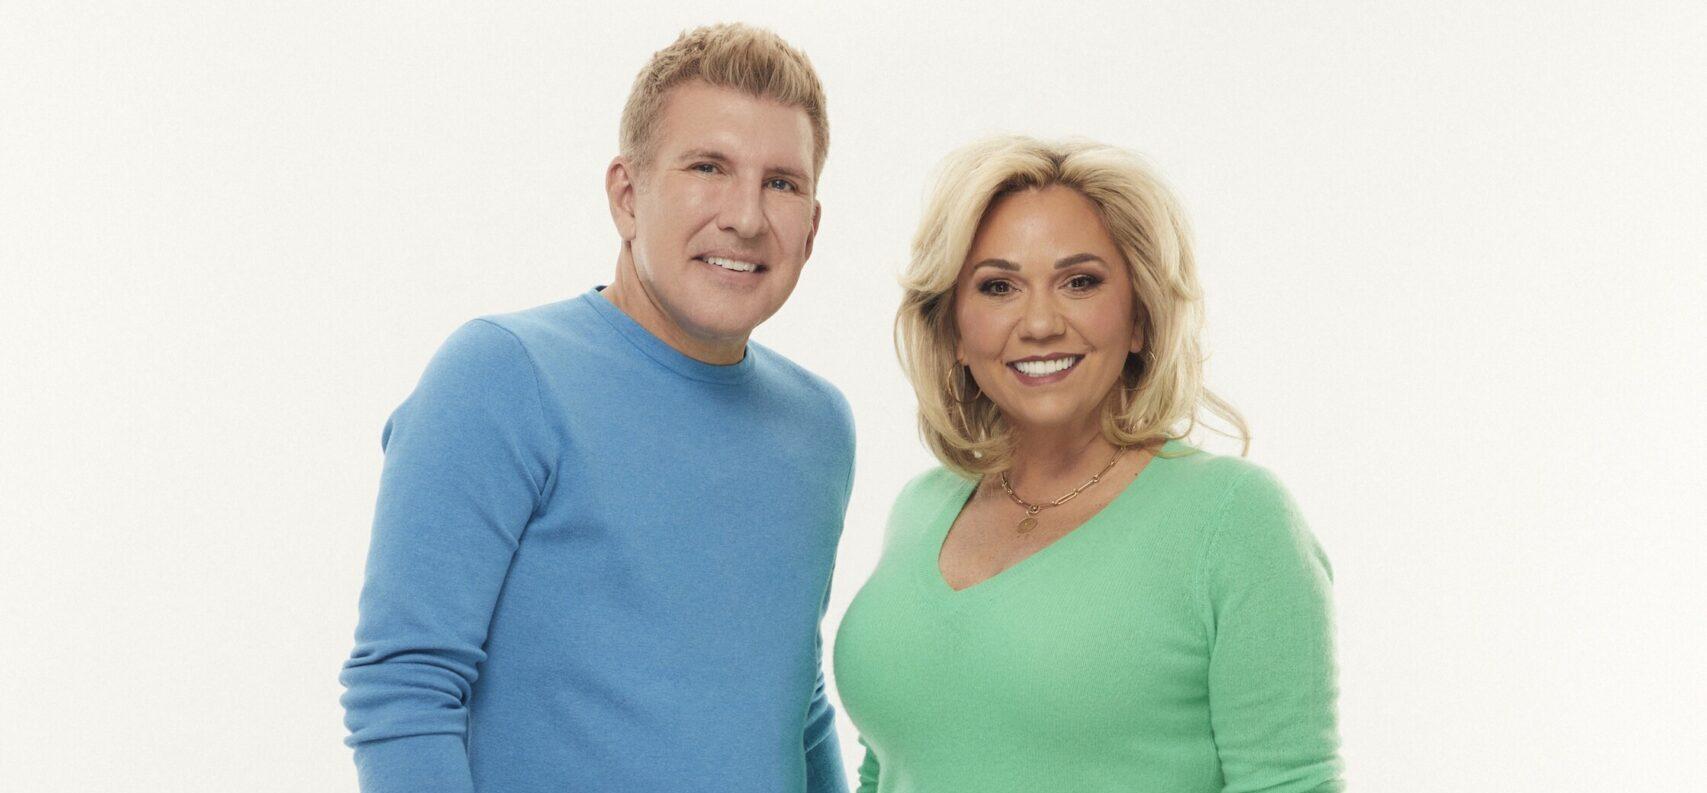 Are Todd Chrisley And His Wife Julie Getting A Divorce?